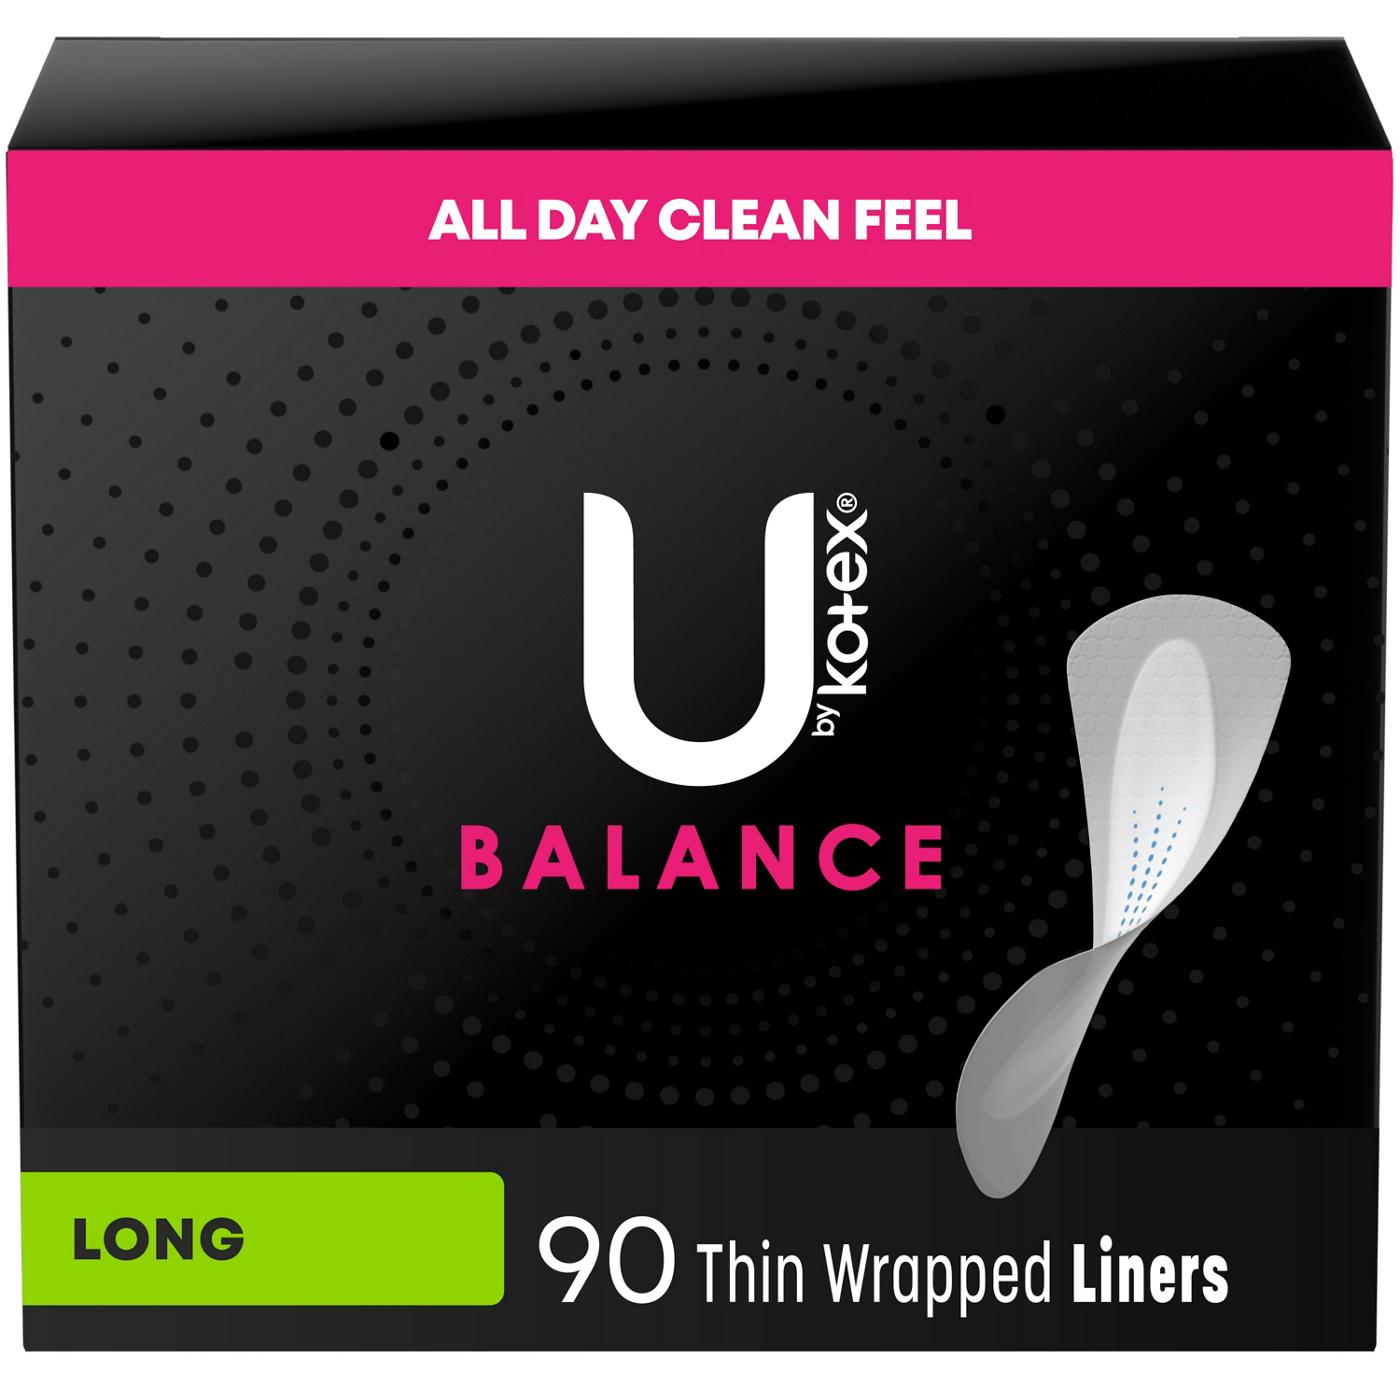 U by Kotex Balance Daily Wrapped Panty Liners - Light Absorbency - Long; image 1 of 2